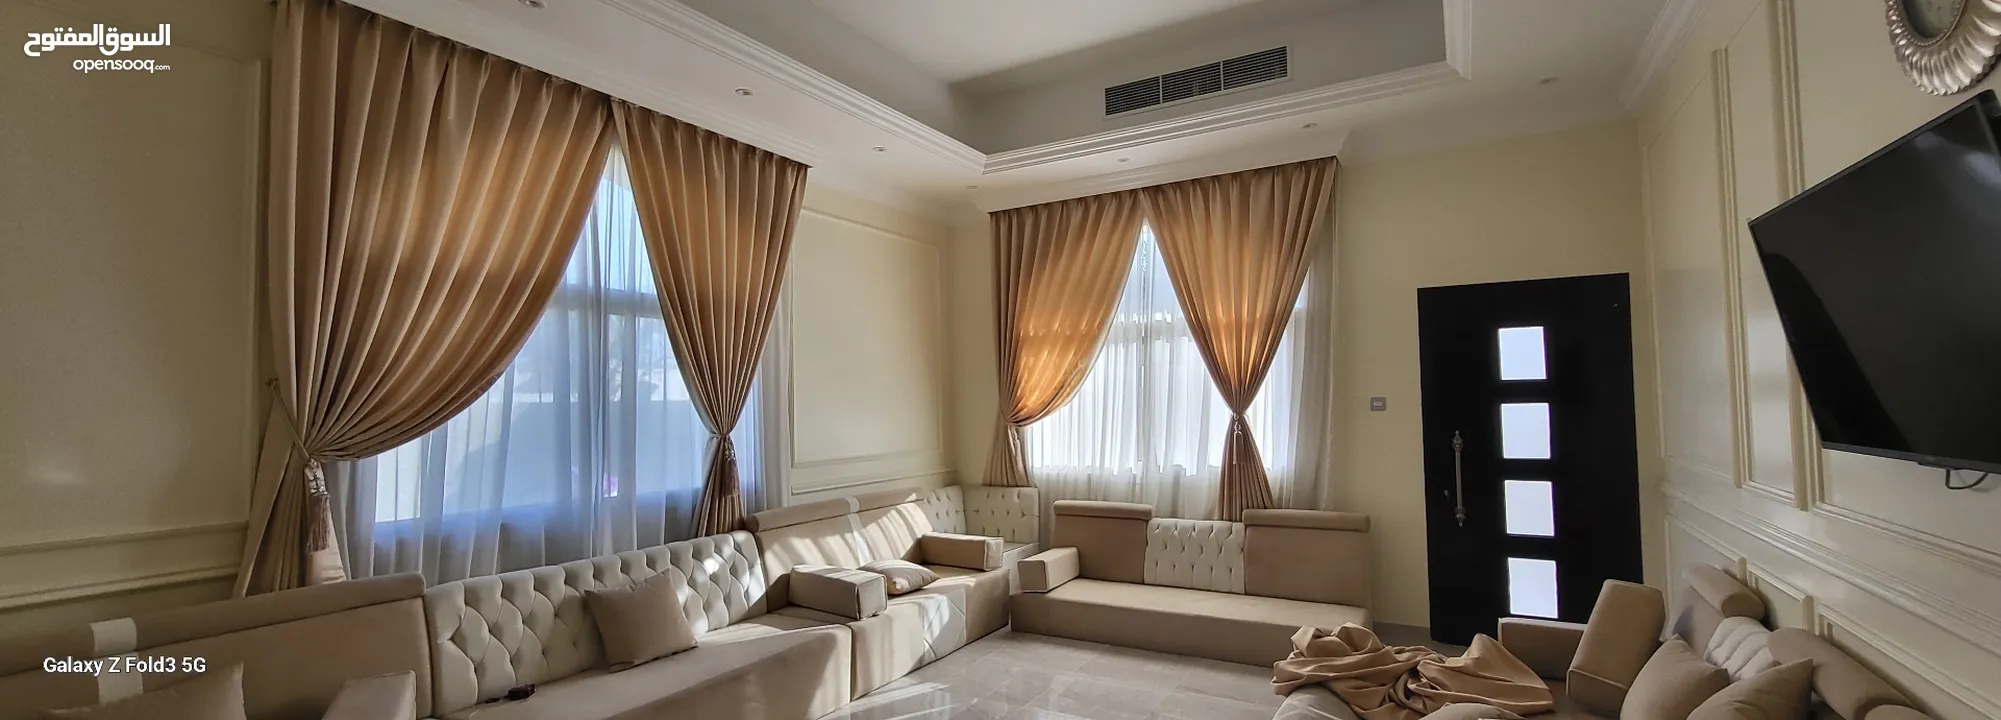 Quality House curtains and sofa